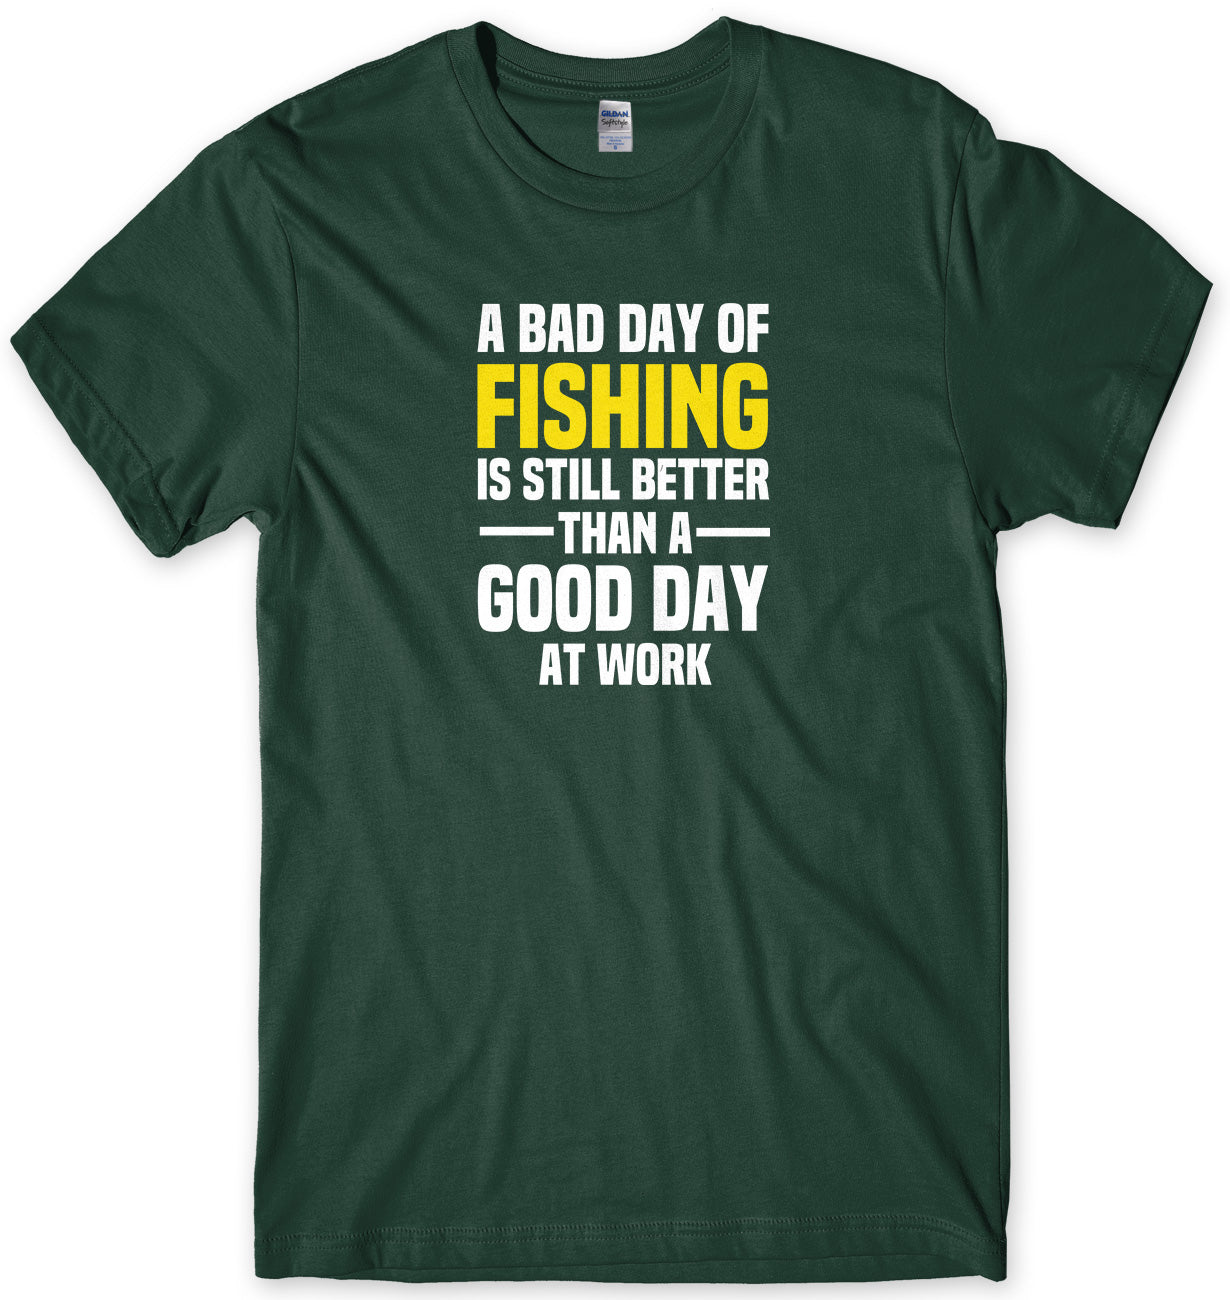 A BAD DAY OF FISHING IS STILL BETTER THAN A GOOD DAY AT WORK MENS FUNNY SLOGAN UNISEX T-SHIRT - StreetSide Surgeons